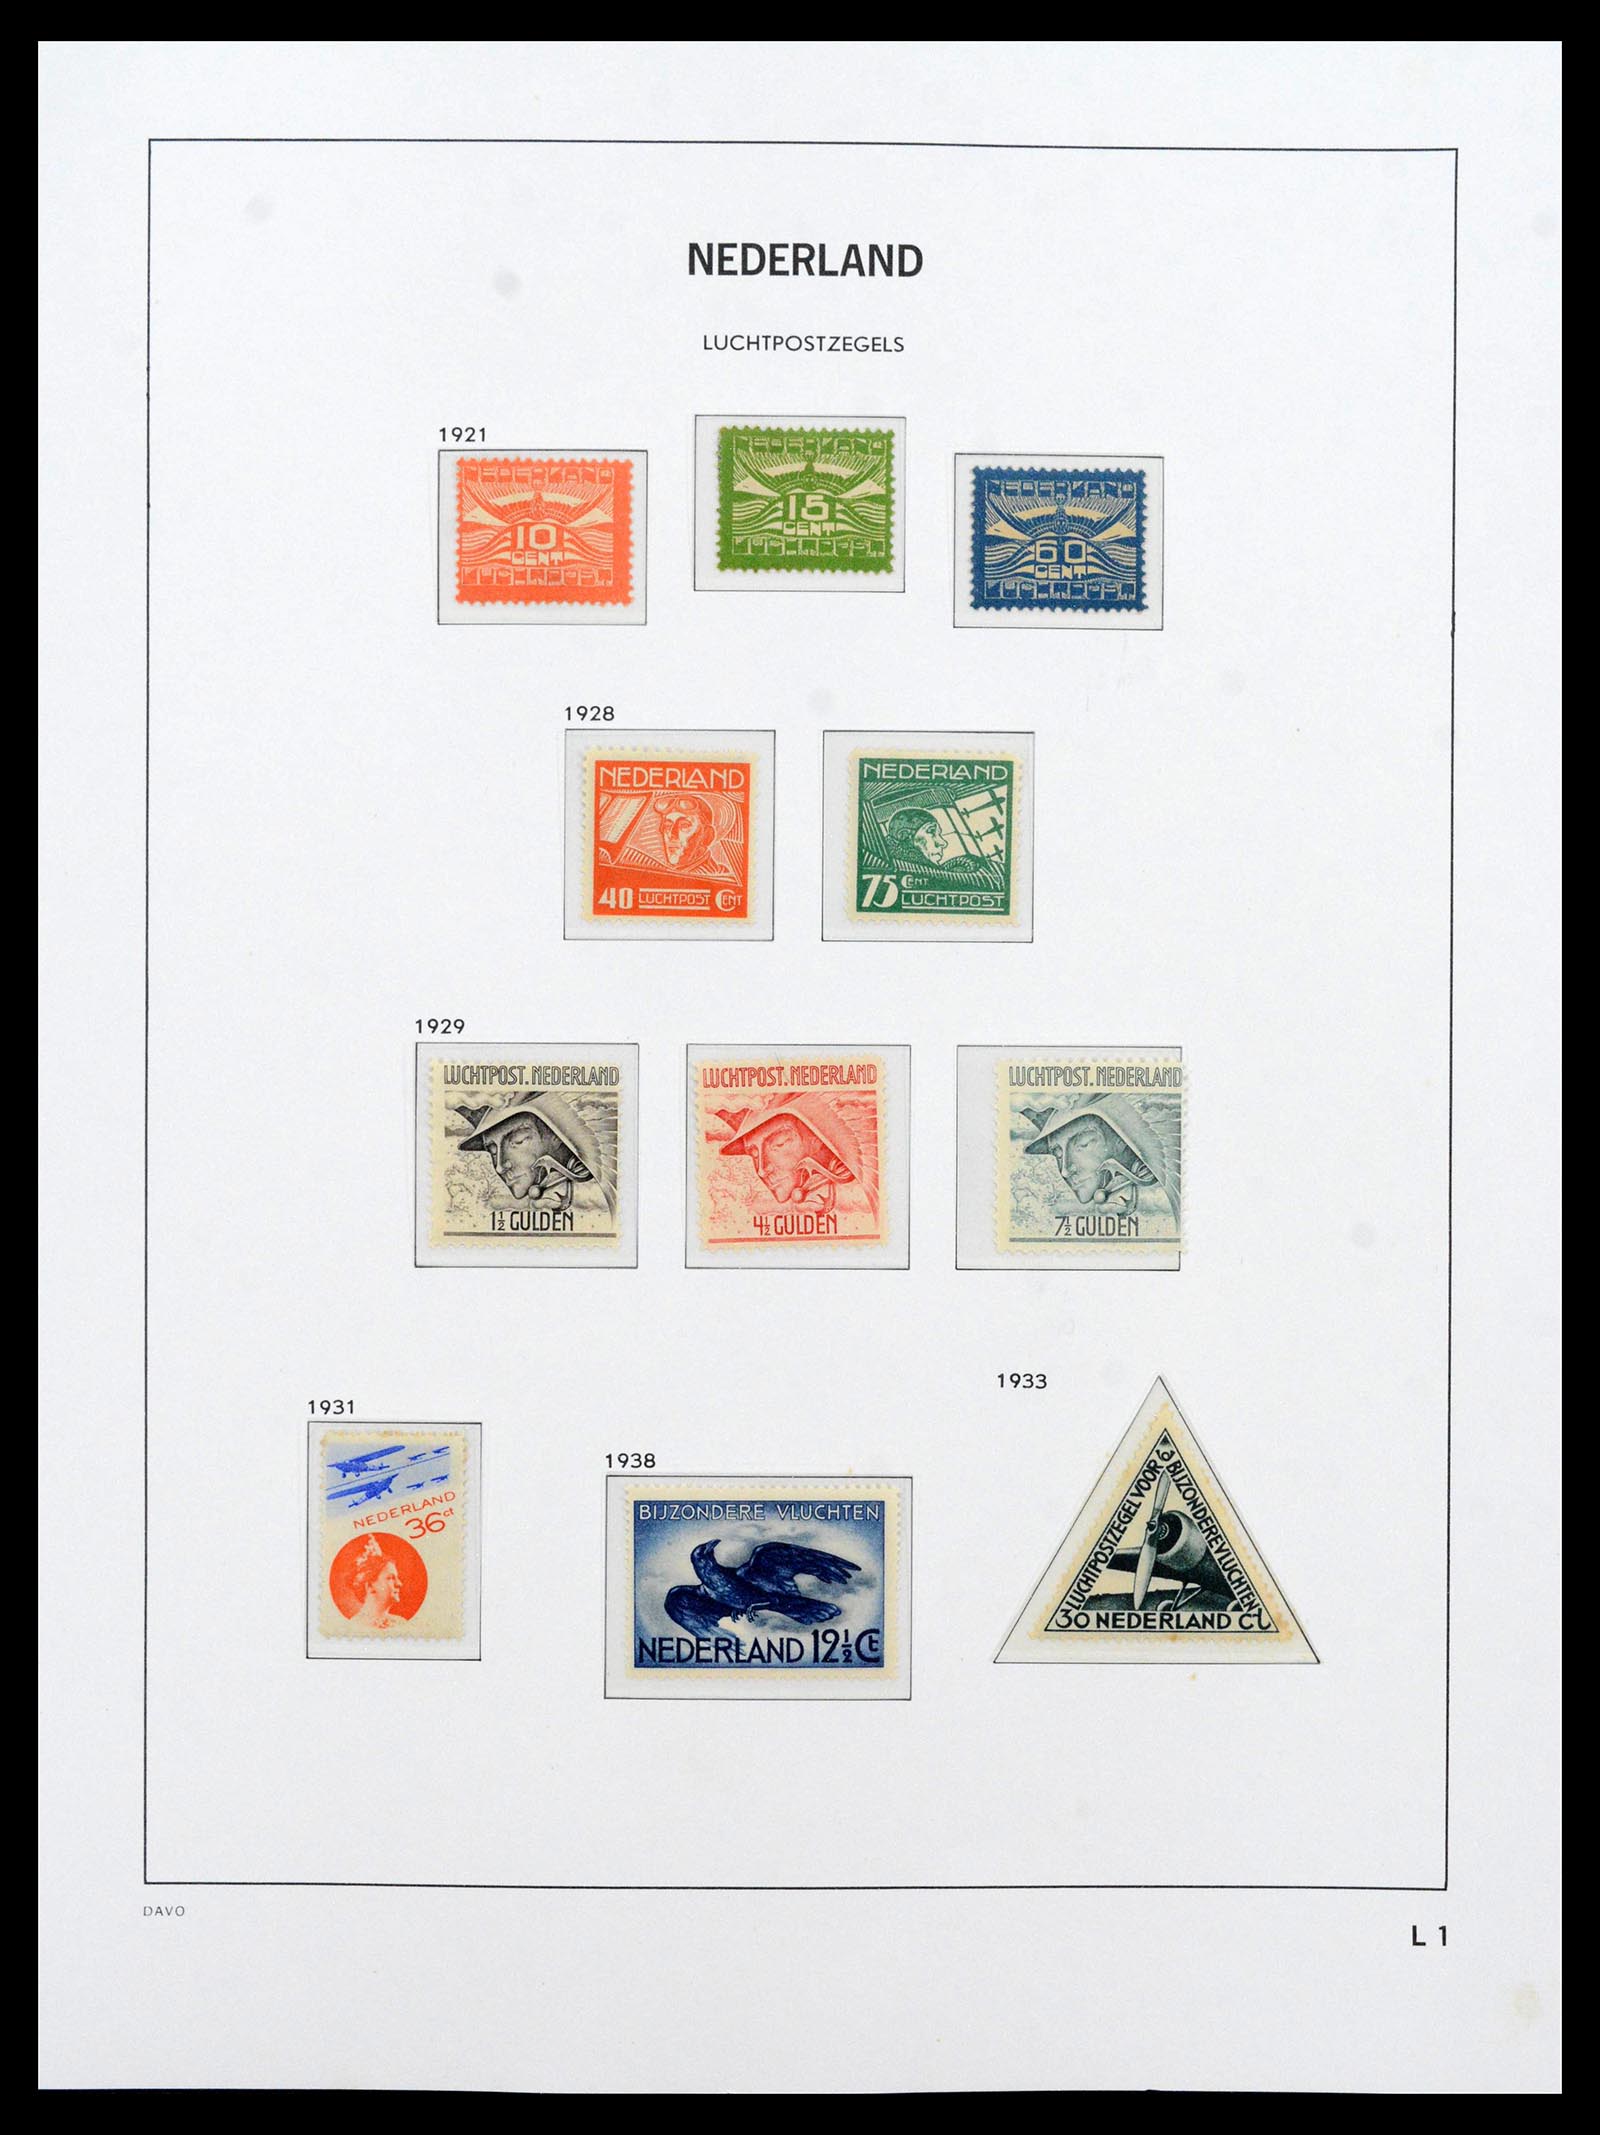 39035 0030 - Stamp collection 39035 Netherlands 1852-1968.